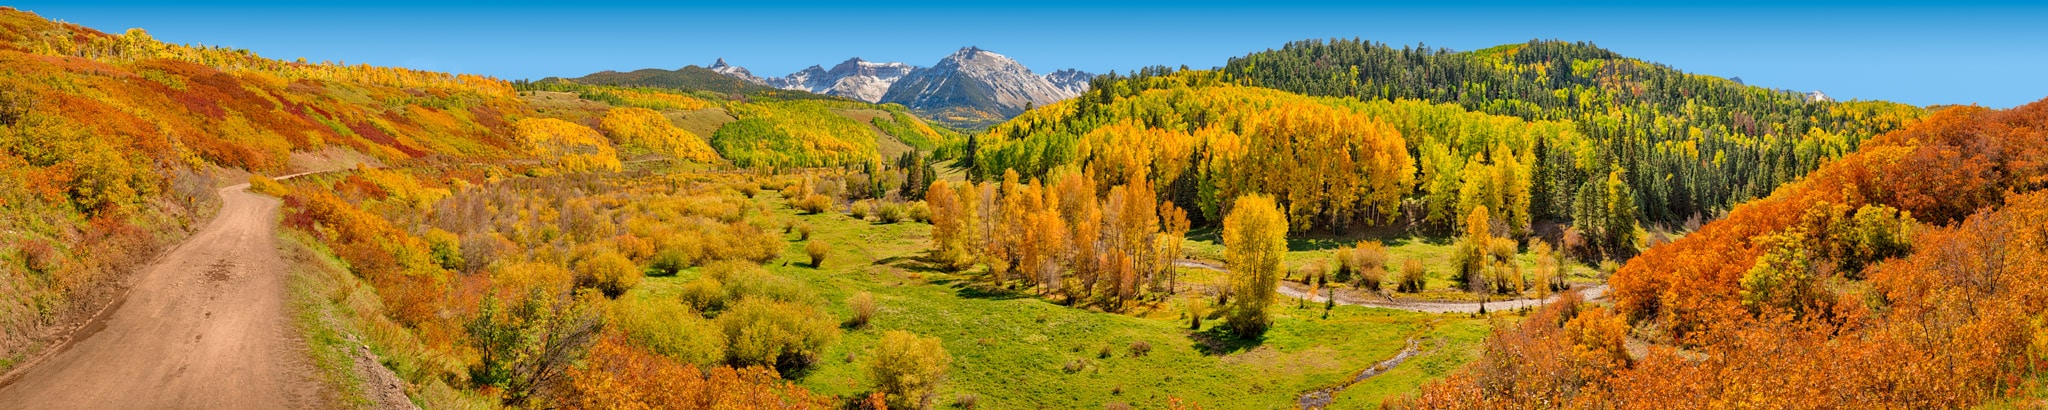 A panoramic view along CR 7, looking toward the Snellels Wilderness showing the autumn colors of aspen, gambel oak, and cottonwoods